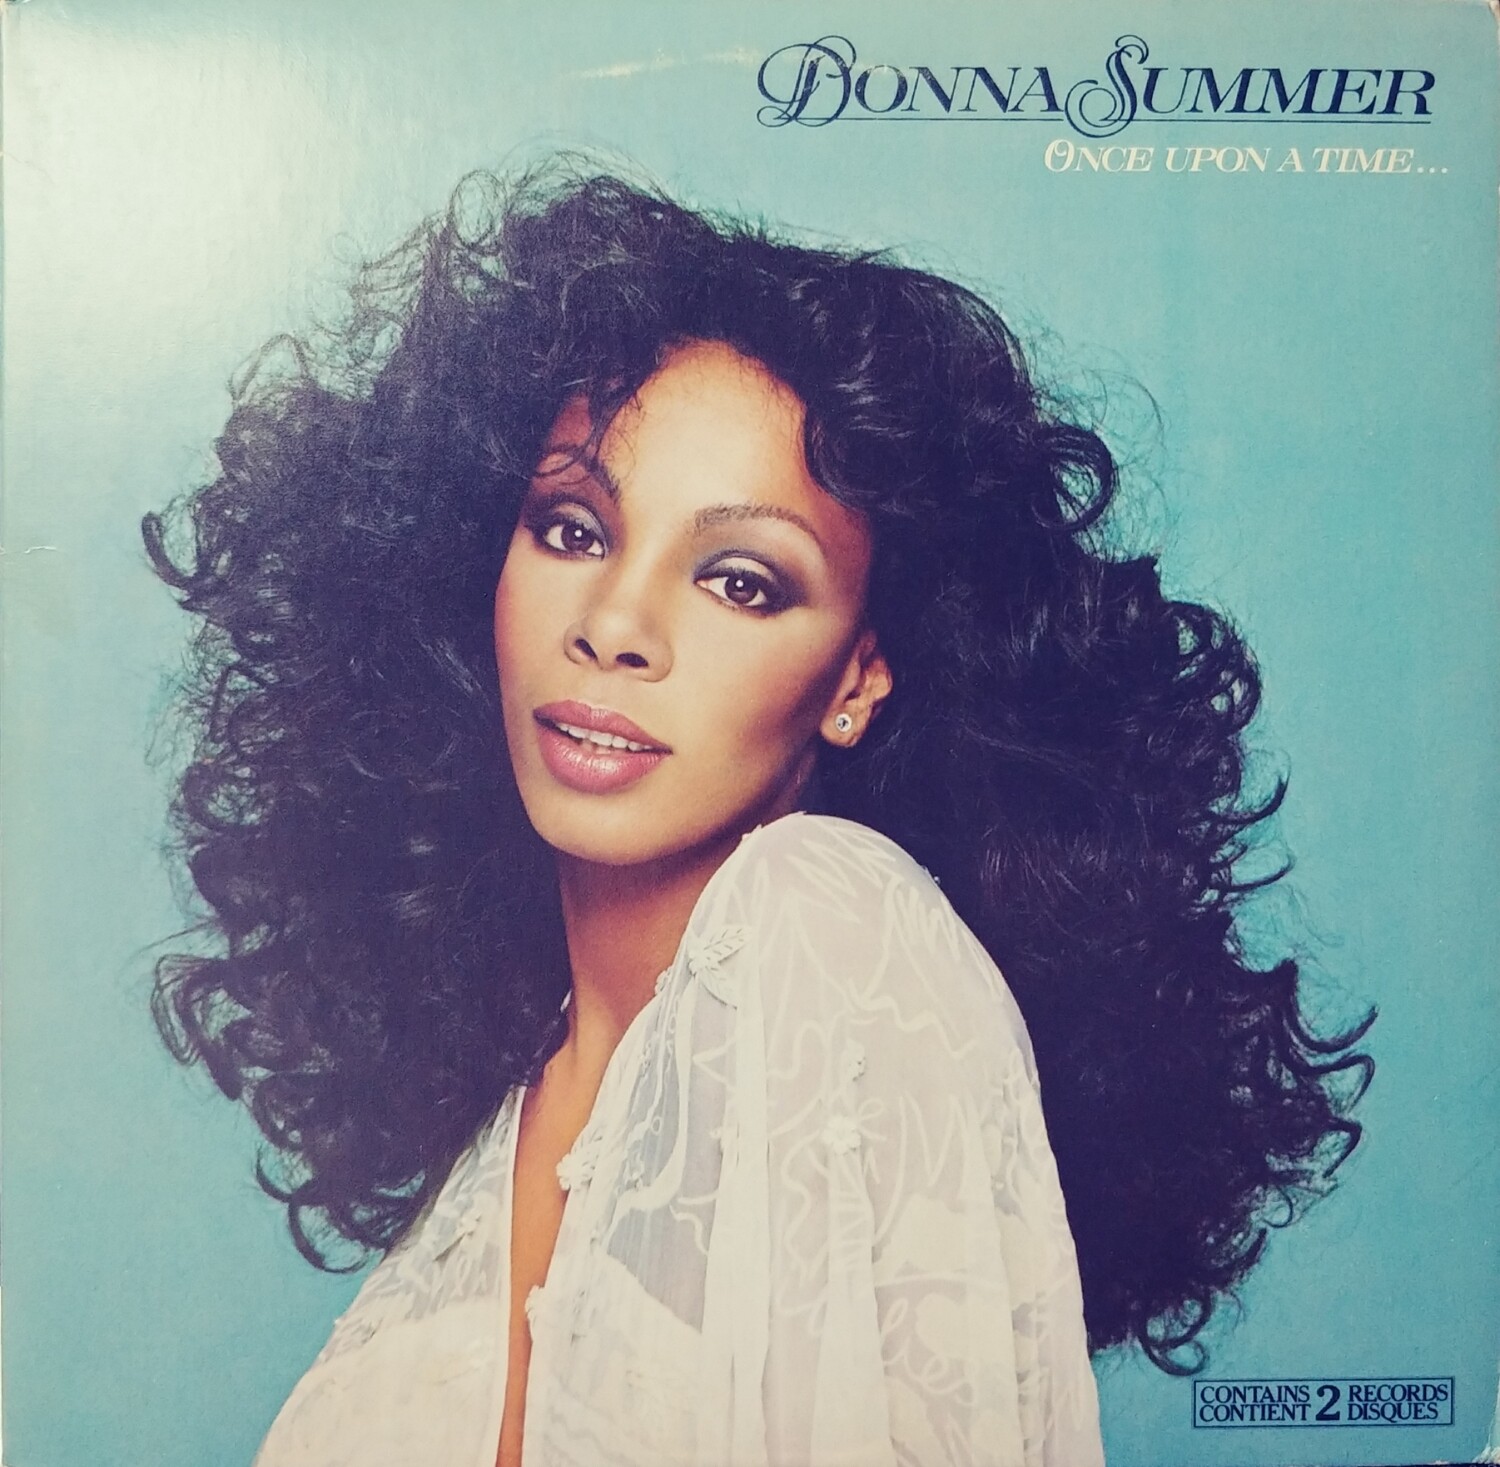 Donna Summer - Once upon a time